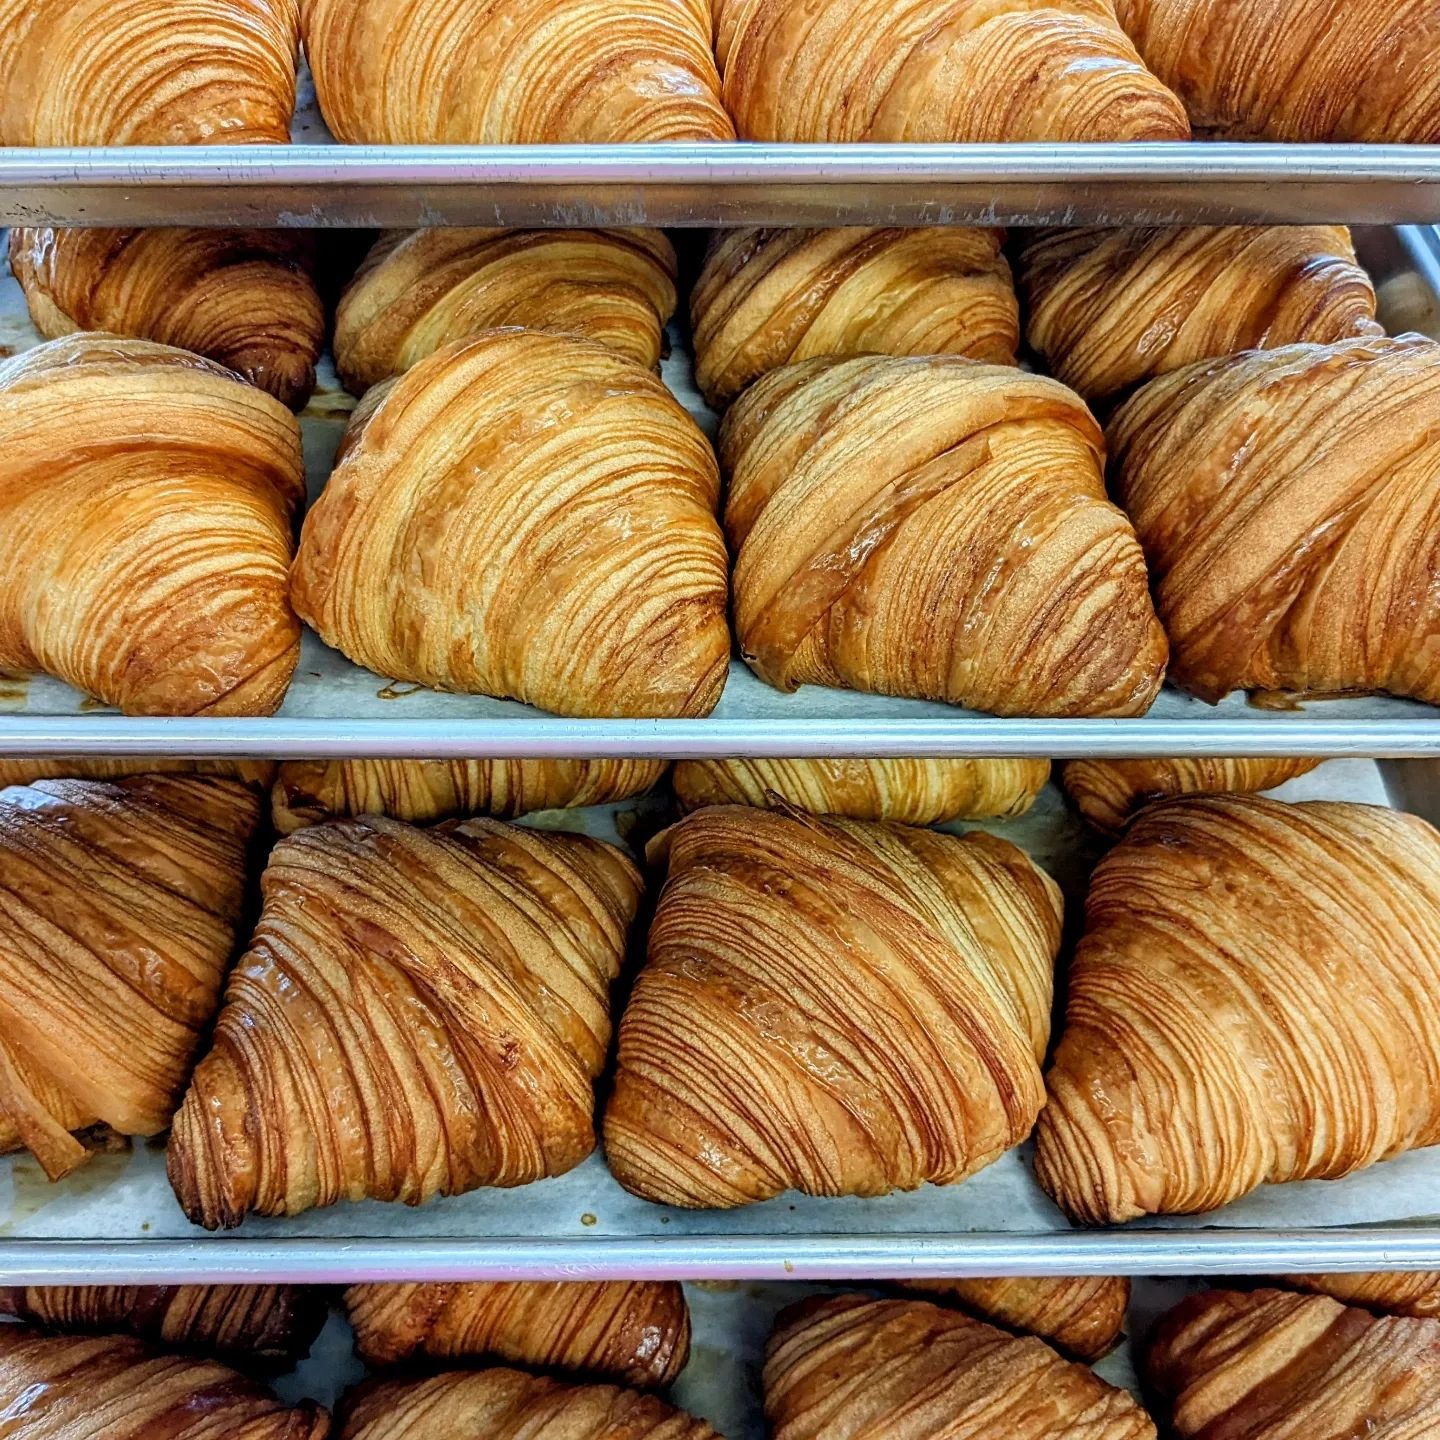 Hello did you order some amazing content?

#sundaybakeday #content #croissants #laminateddough #eatgrandrapids #eatgr #grandrapidsfood #grandrapidsfoodie #grfood #grbusiness